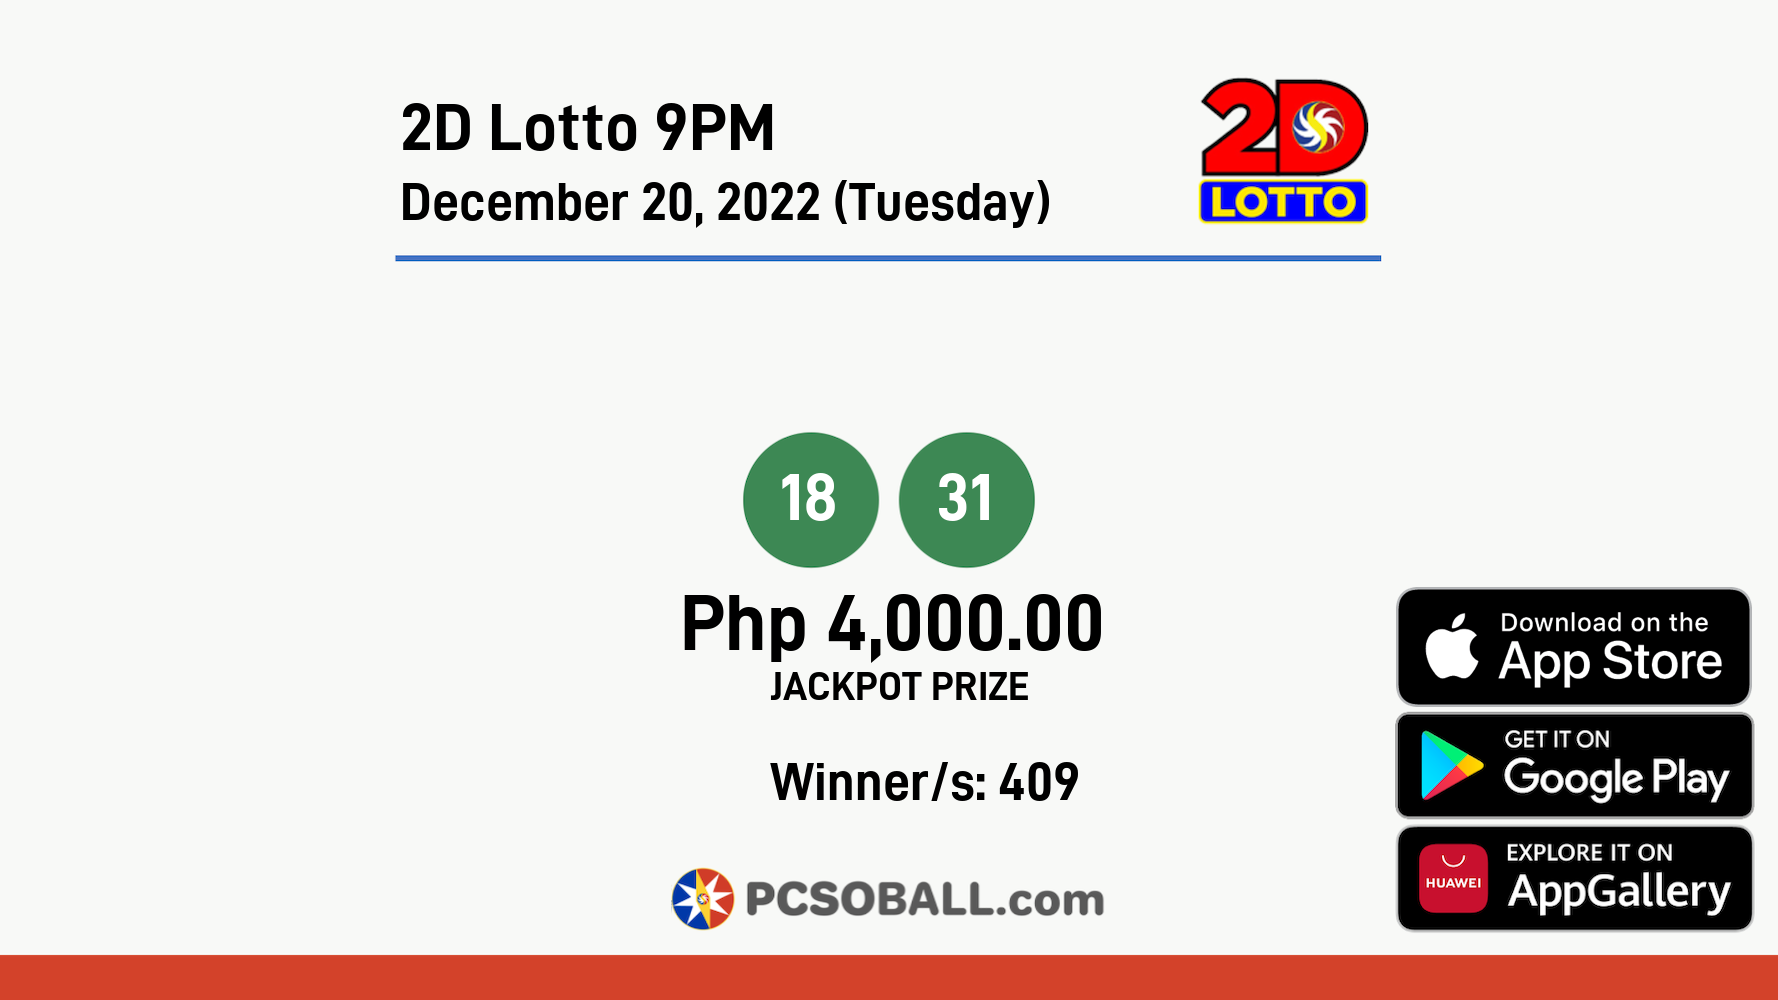 2D Lotto 9PM December 20, 2022 (Tuesday) Result